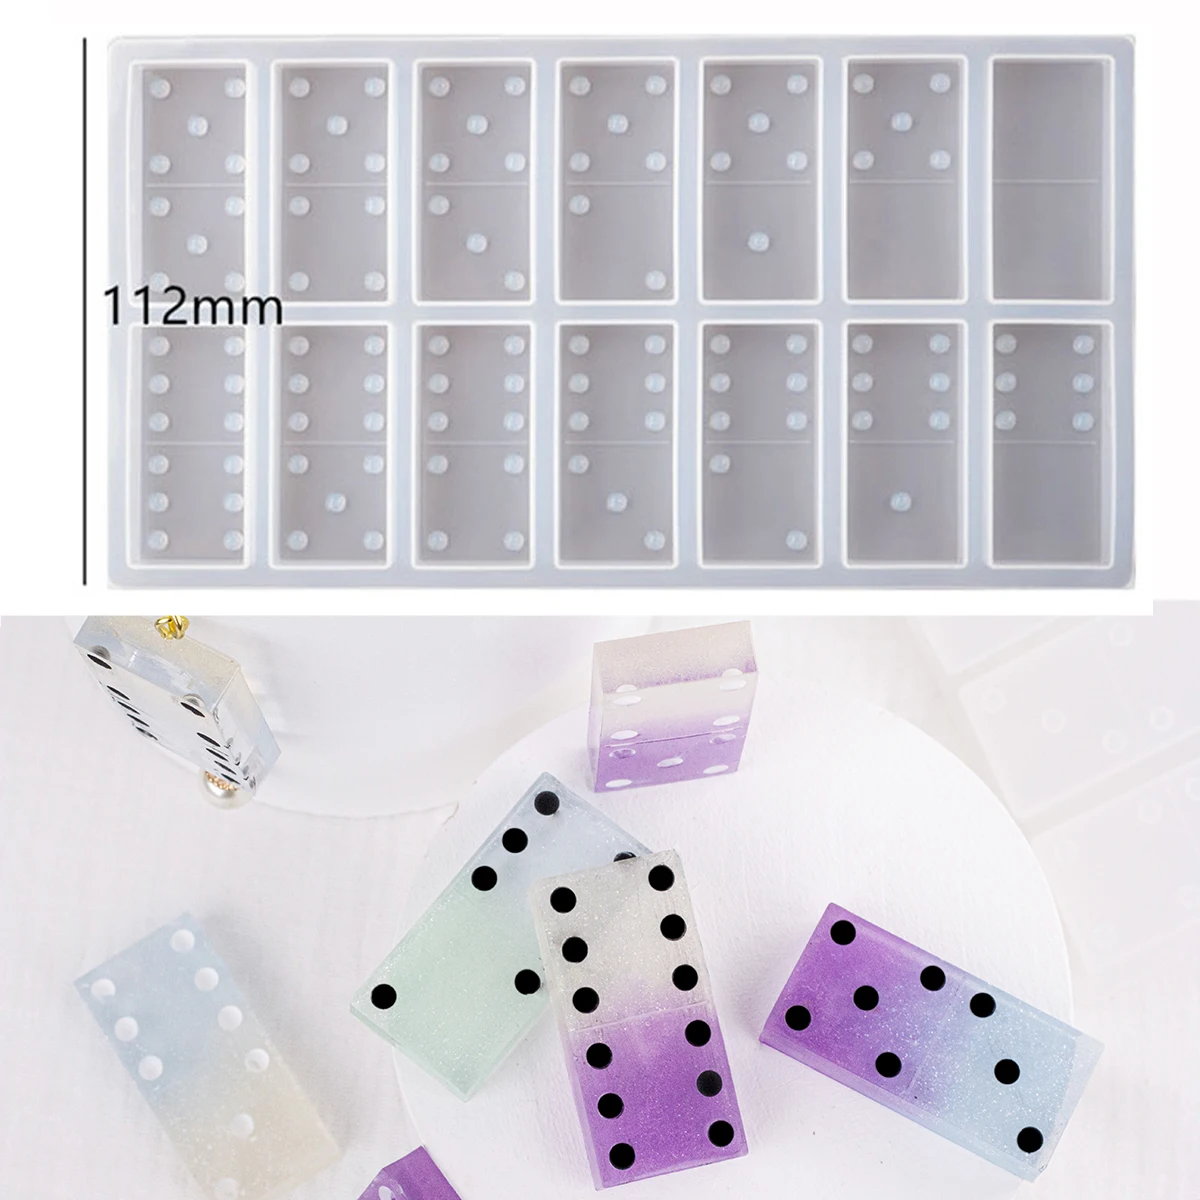 Dominoes Mirror Pai Gow Domino Silicone Mold Silicone Mold for DIY Craft UV Epoxy mould Handmade Tools for Resin